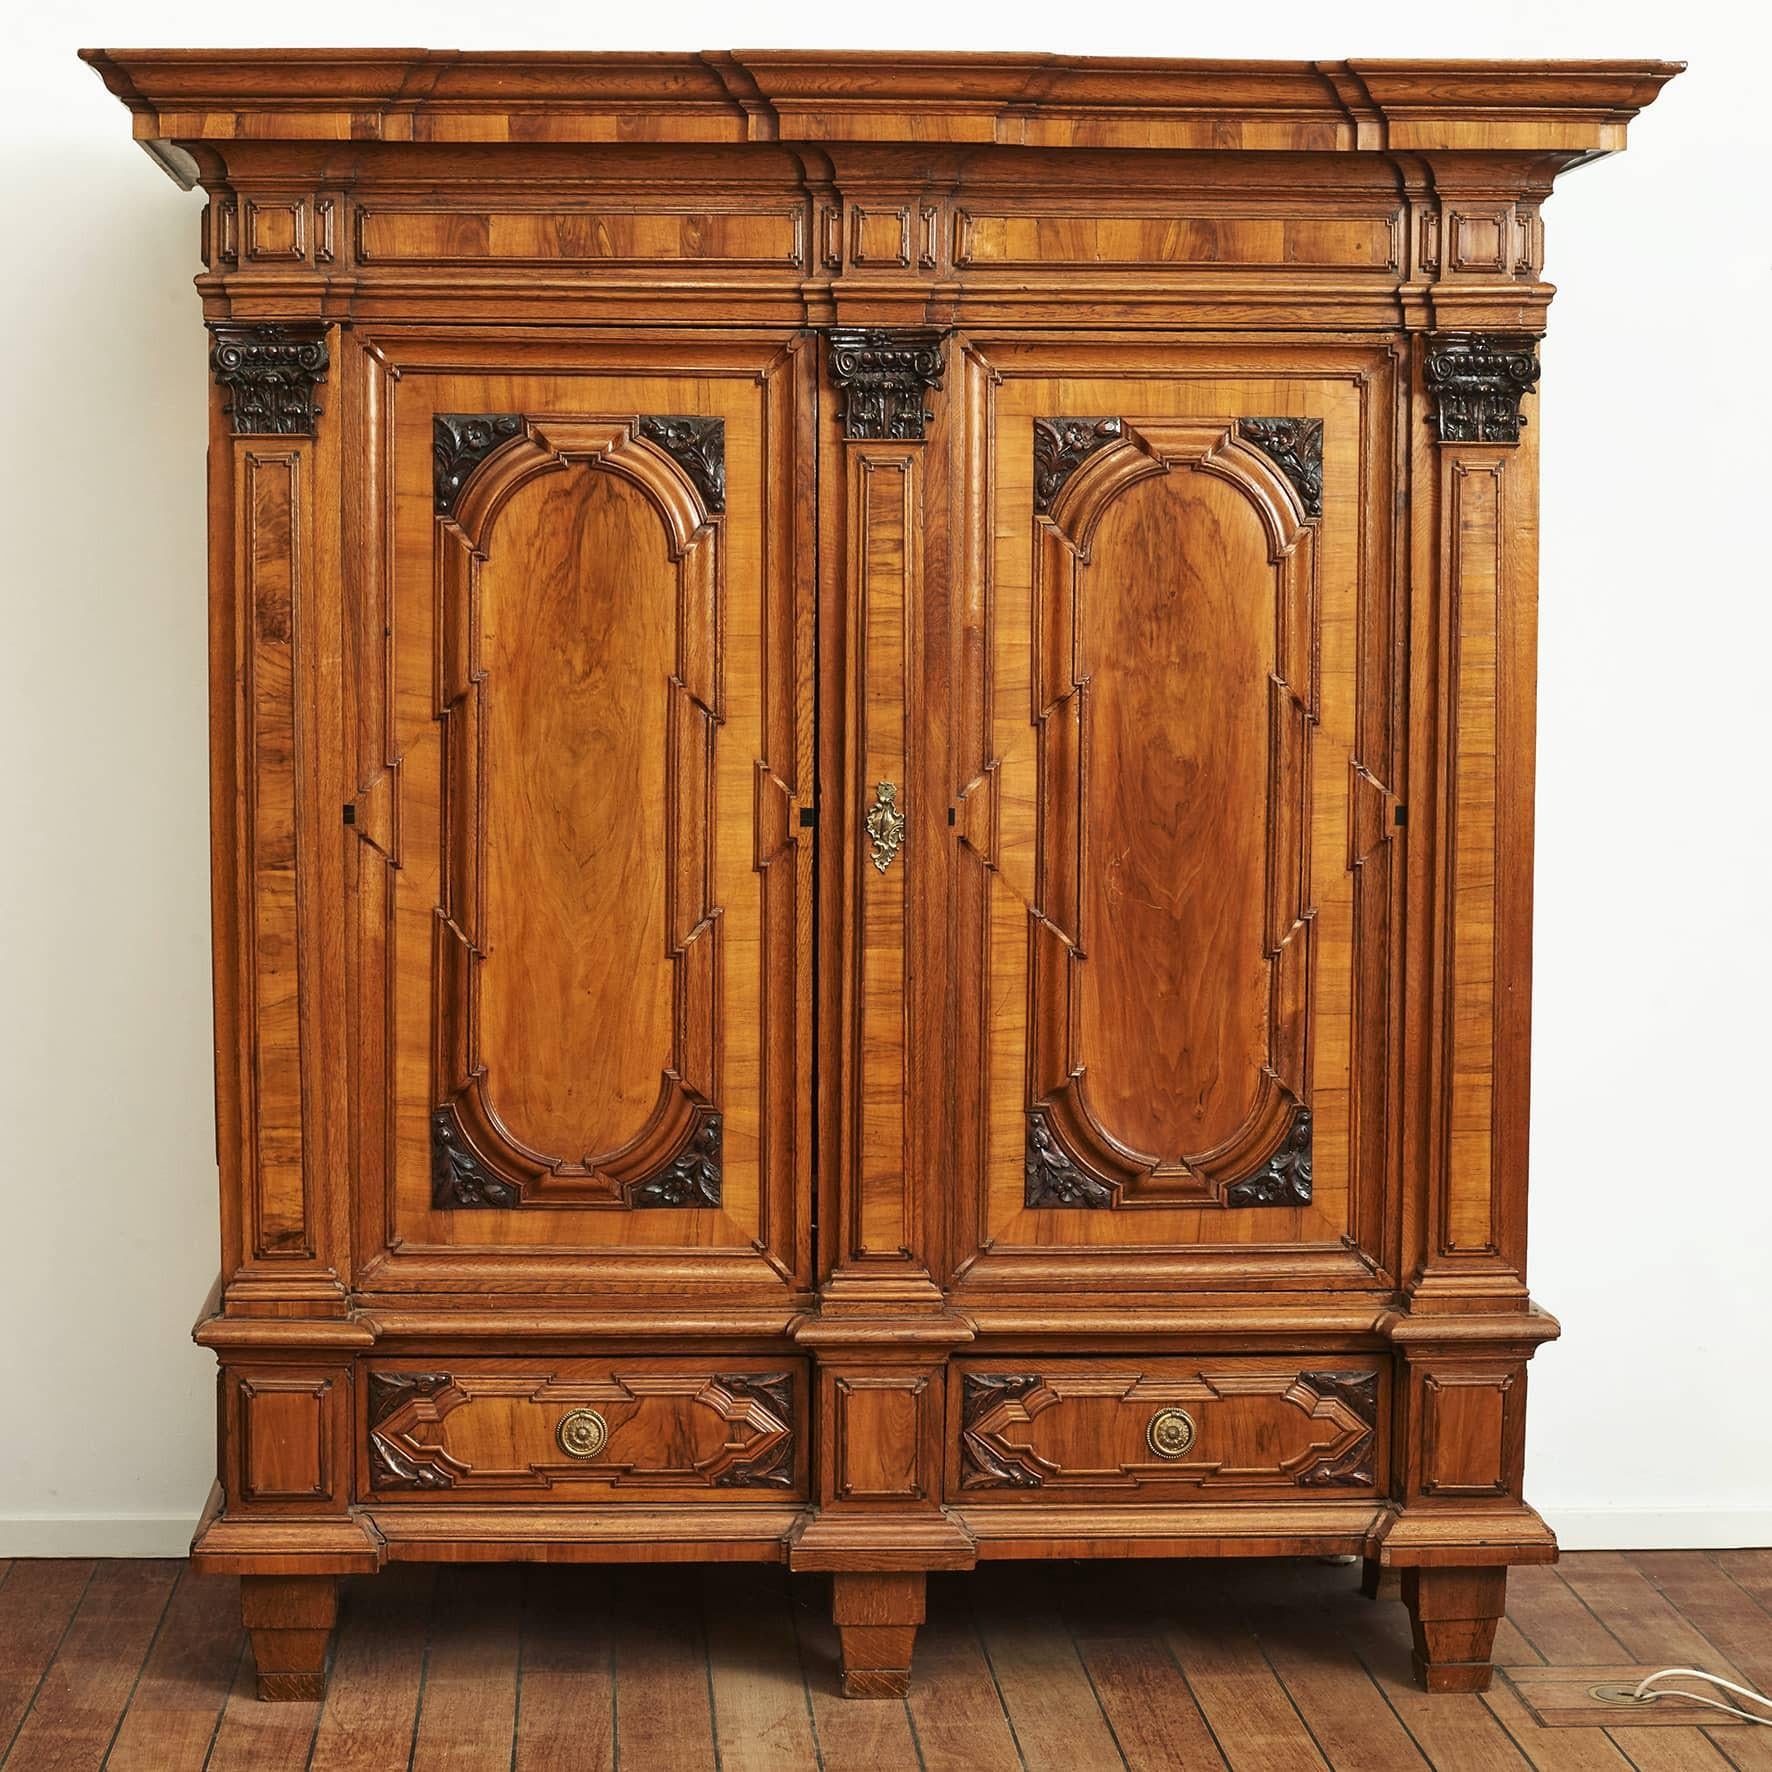 Impressive two-door baroque cabinet or armoire in oak and walnut.
From a Danish manor house, c. 1730-1750.
This large-sized cabinet features an architecturally architecture including a top section with a nicely molded and overhung breakfront